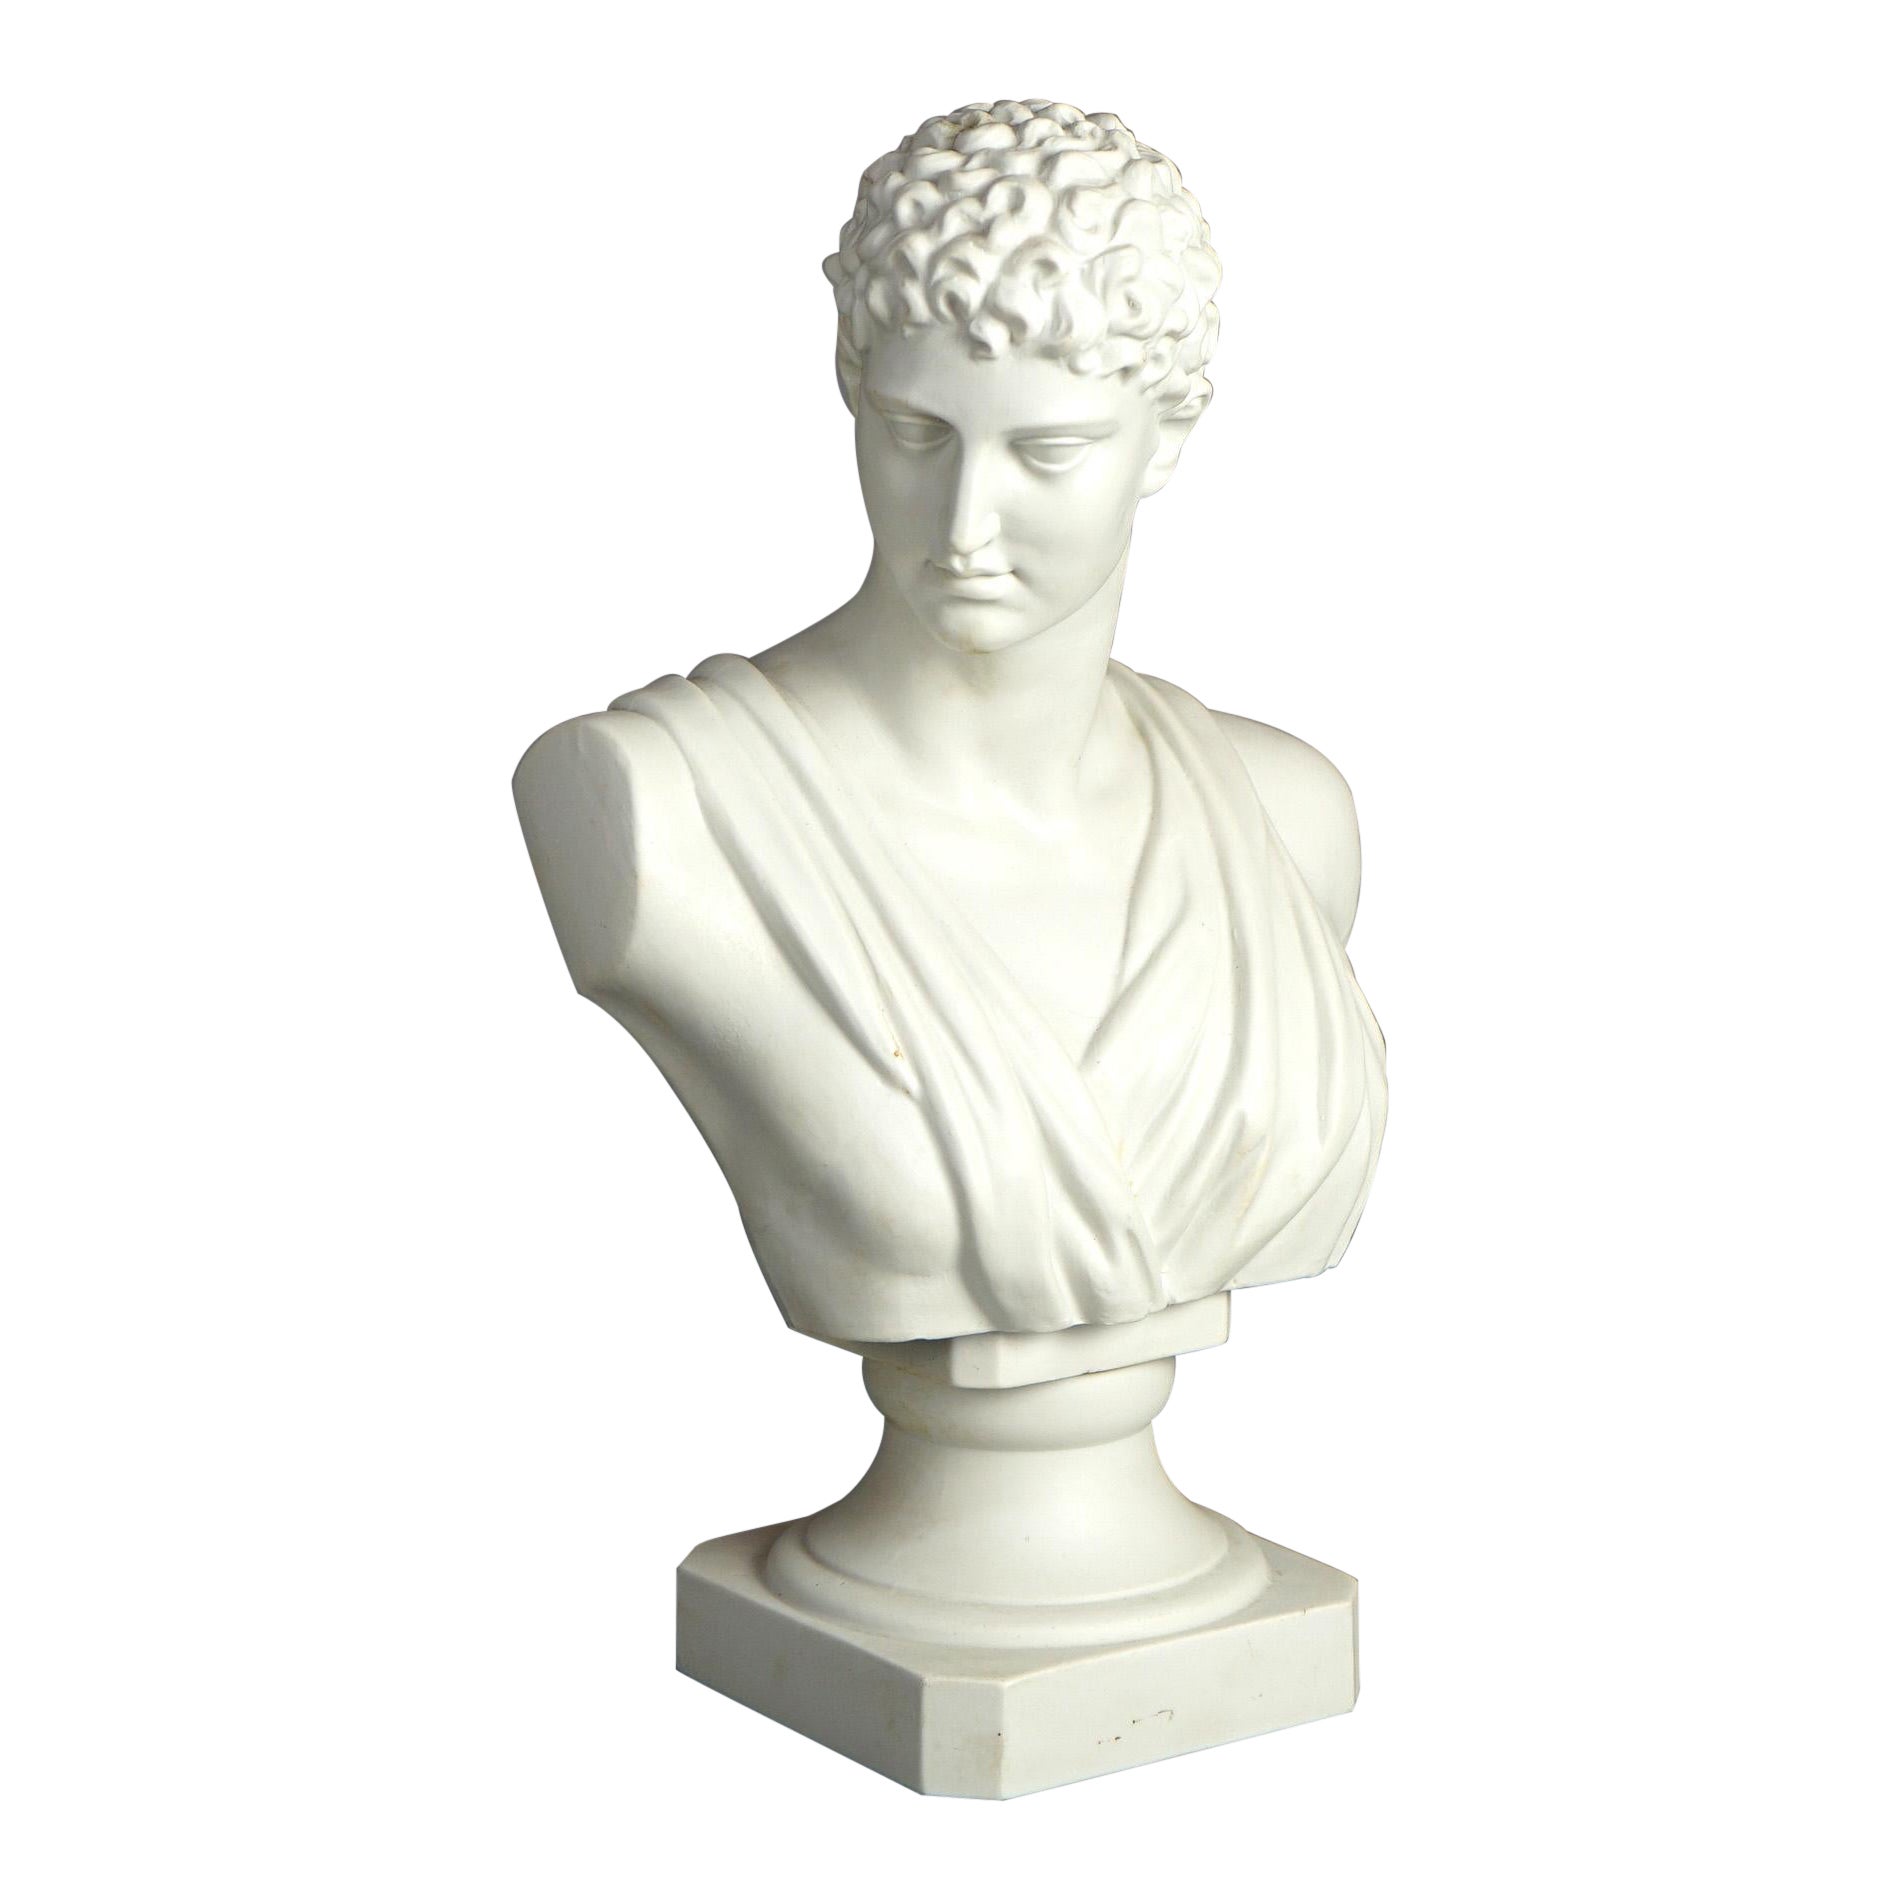 Antique French Neoclassical Parian Porcelain Bust of Michaelangelo's David C1900